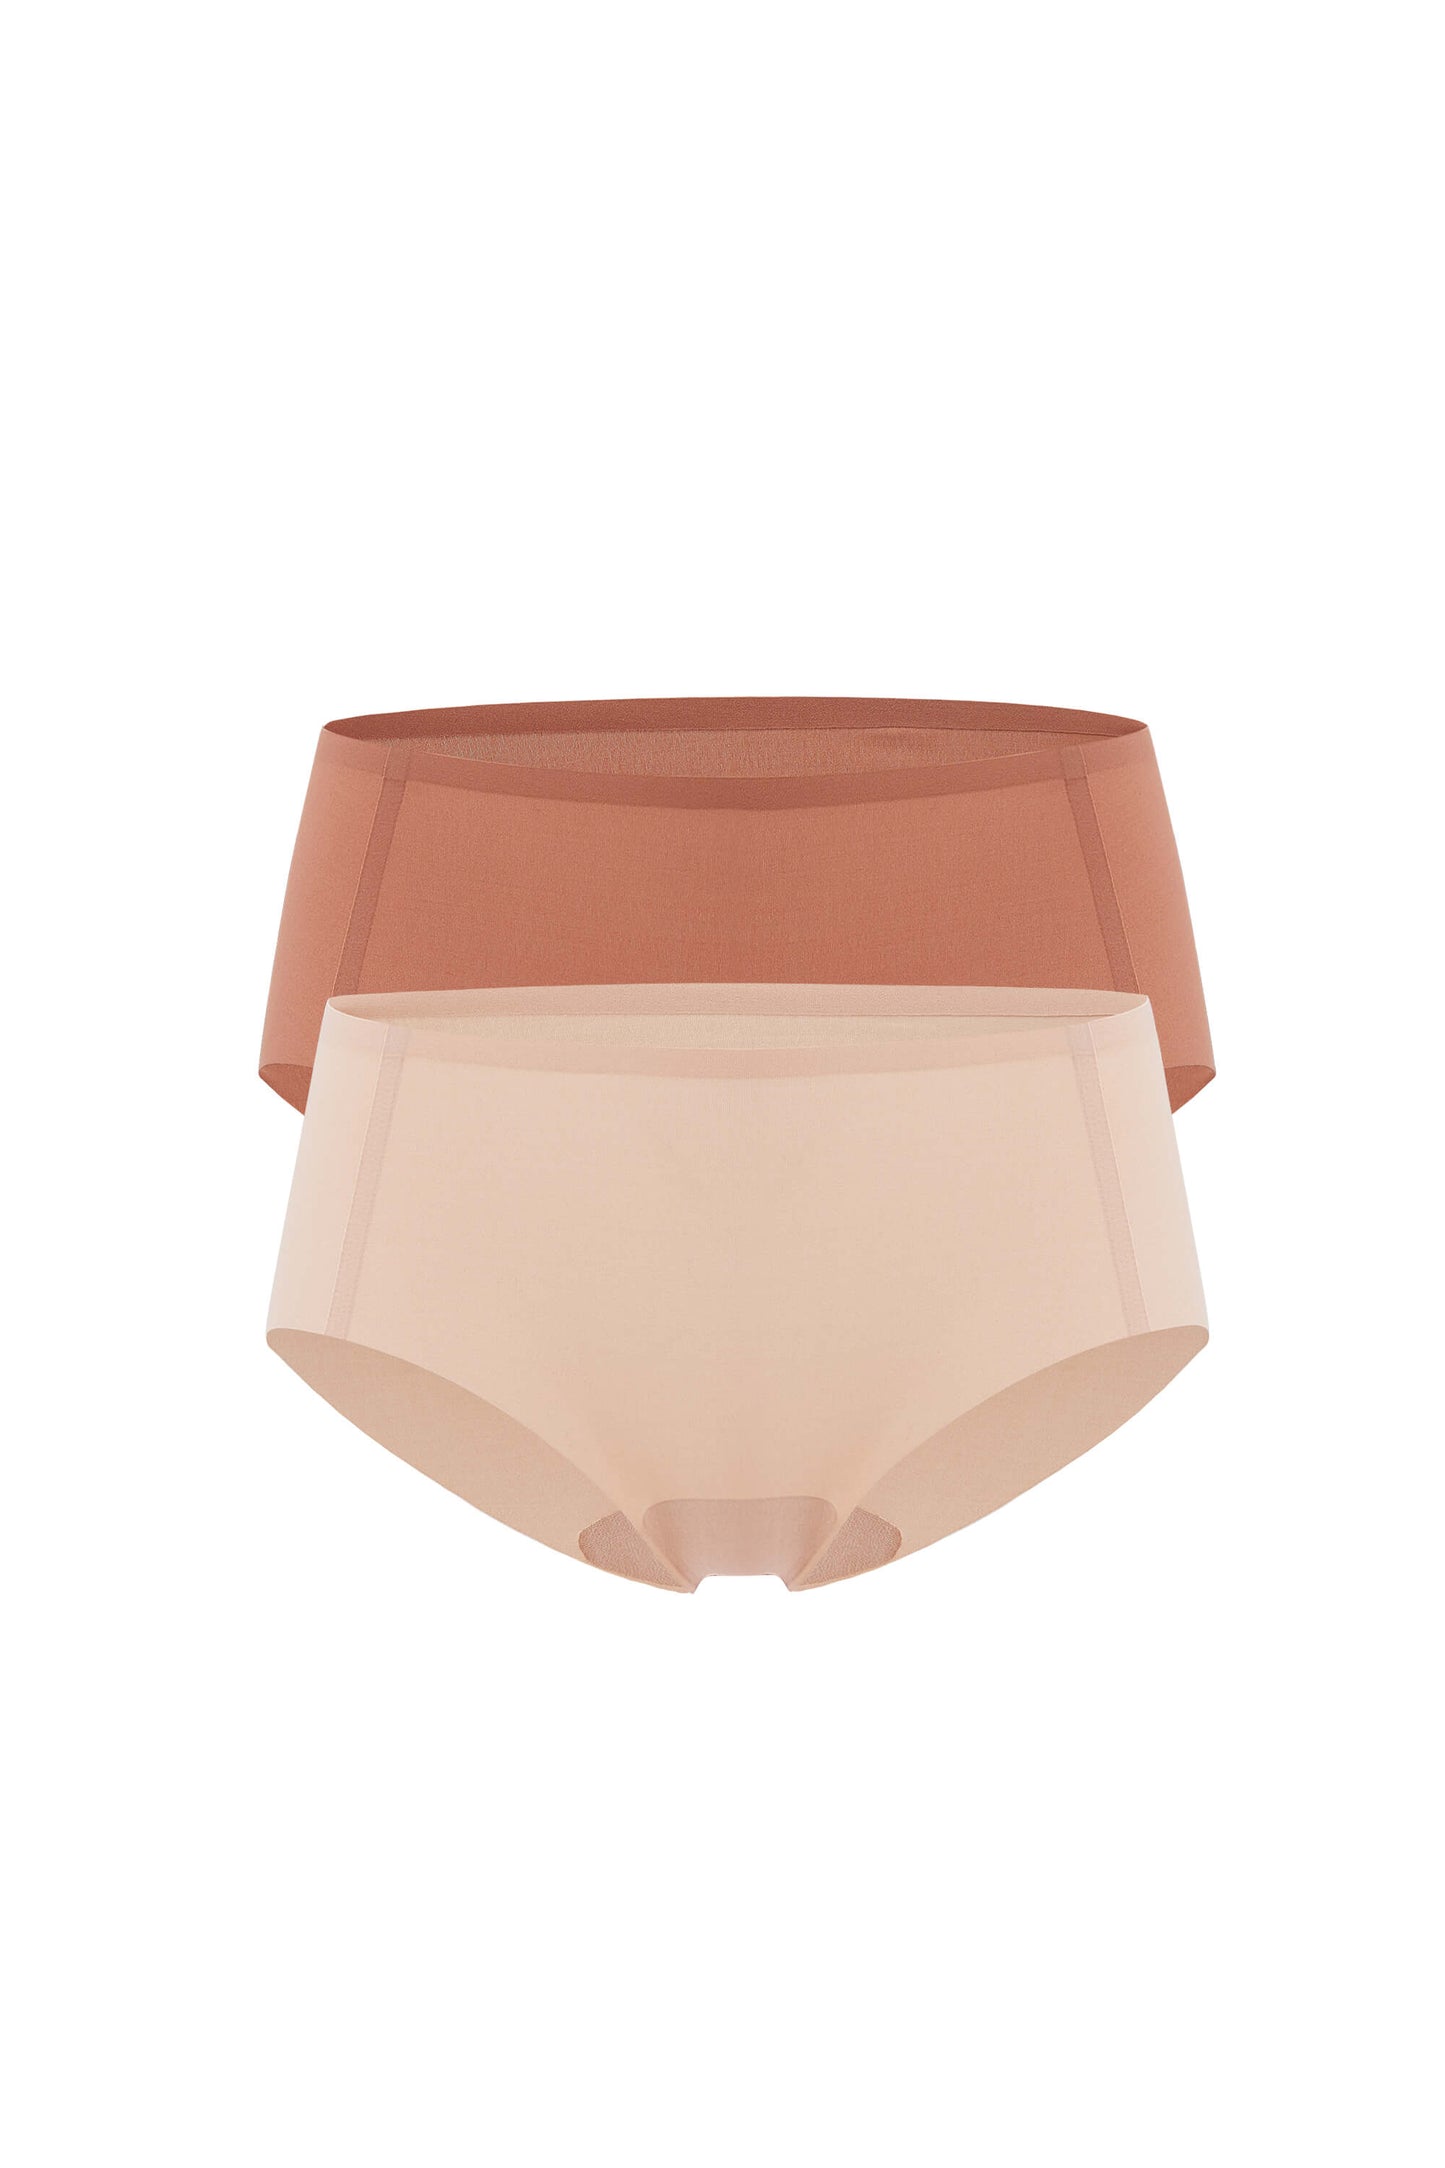 Flat lay image of rust-colored underwear and beige underwear